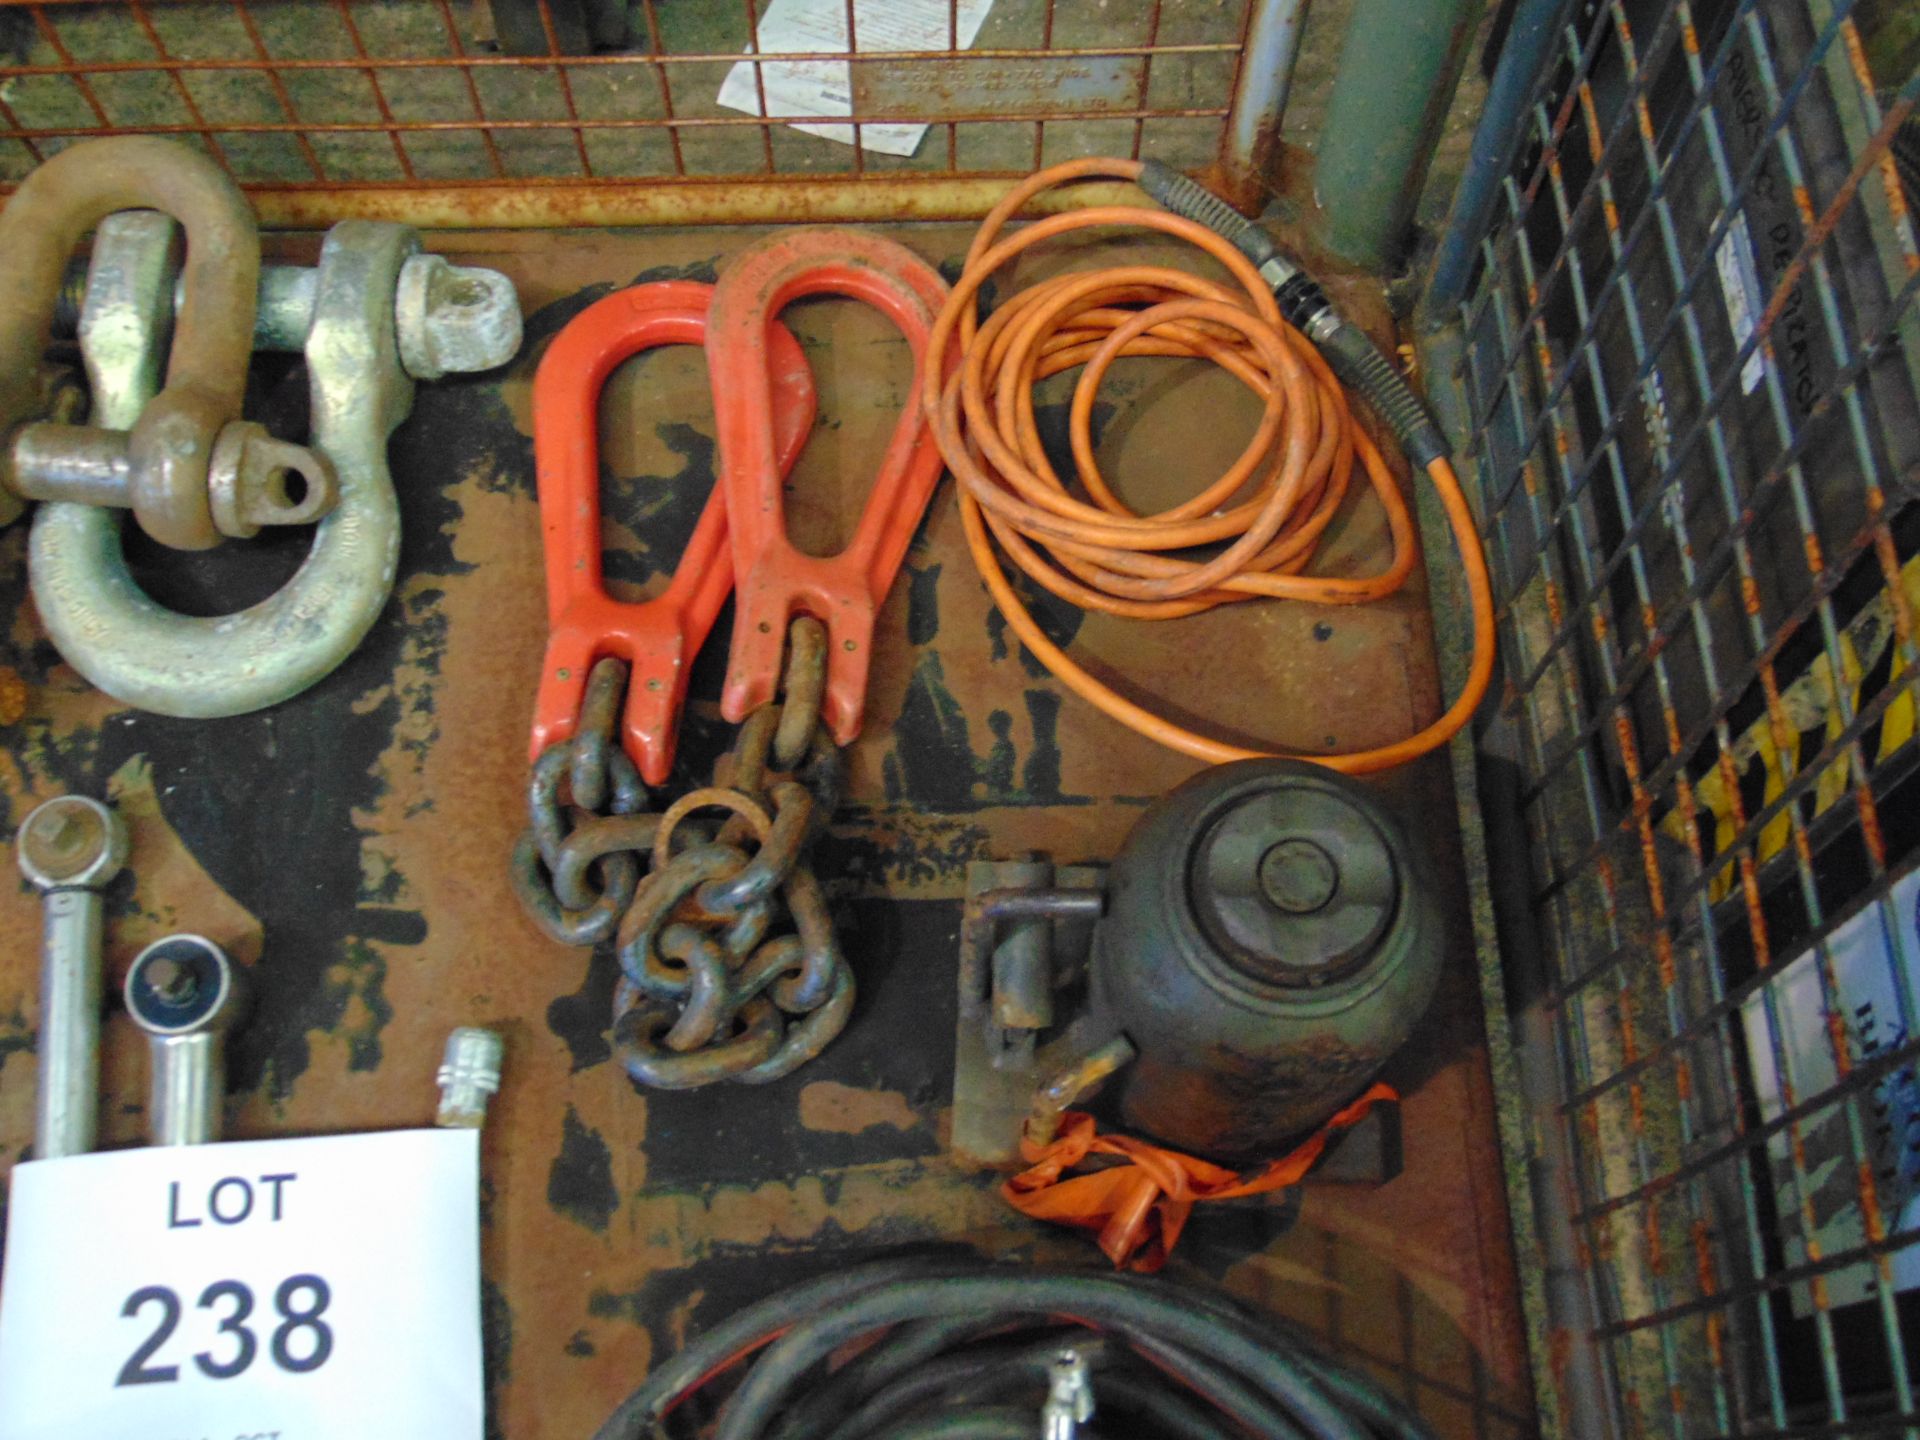 1X STILLAGE OF RECOVERY EQUIPMENT TOOLS GREASE GUN ETC - Image 3 of 6